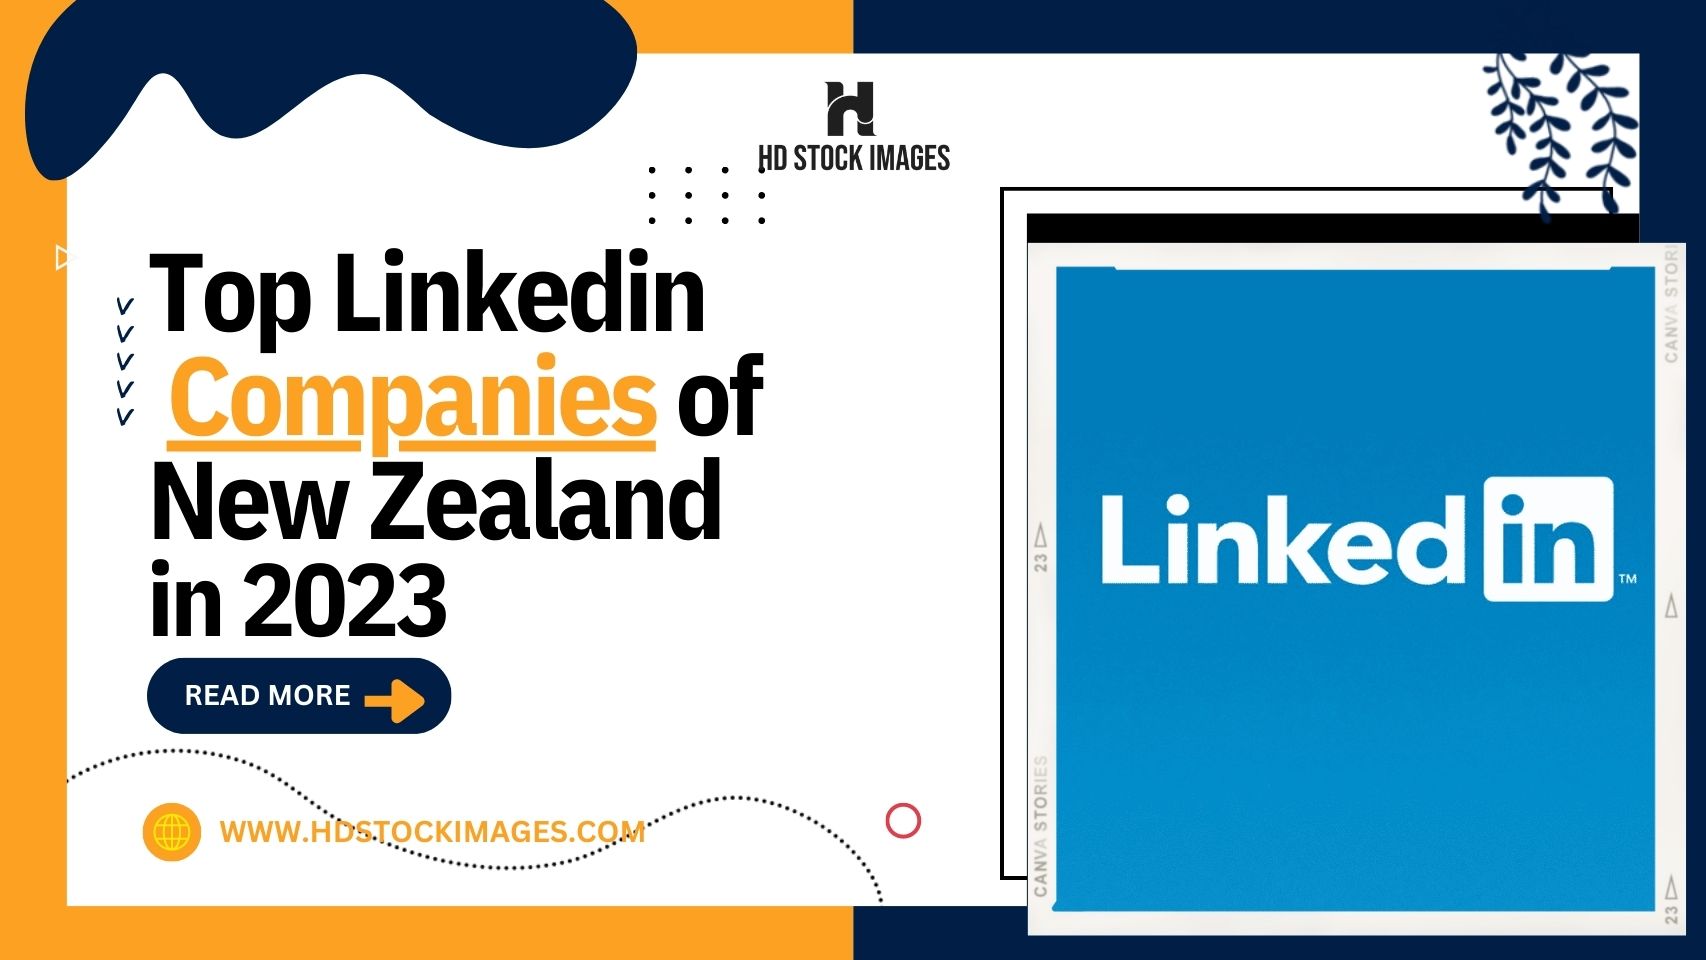 an image of List of Top Linkedin Companies of New Zealand in 2023